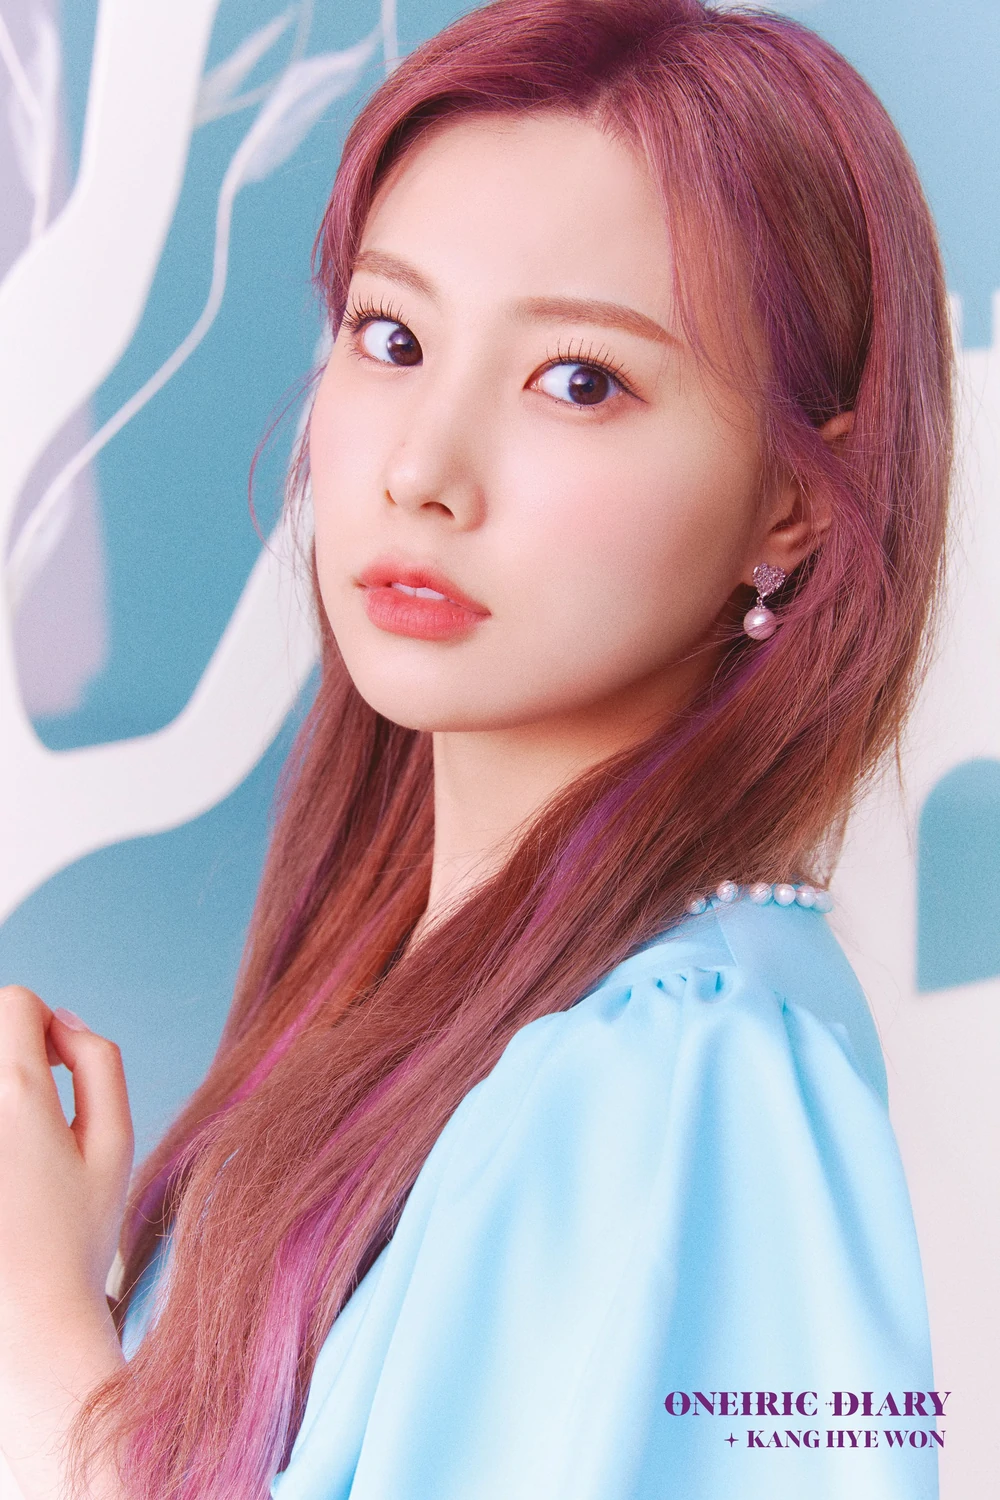 IZ*ONE Oneiric Diary Hyewon Concept Teaser Picture Image Photo Kpop K-Concept 4